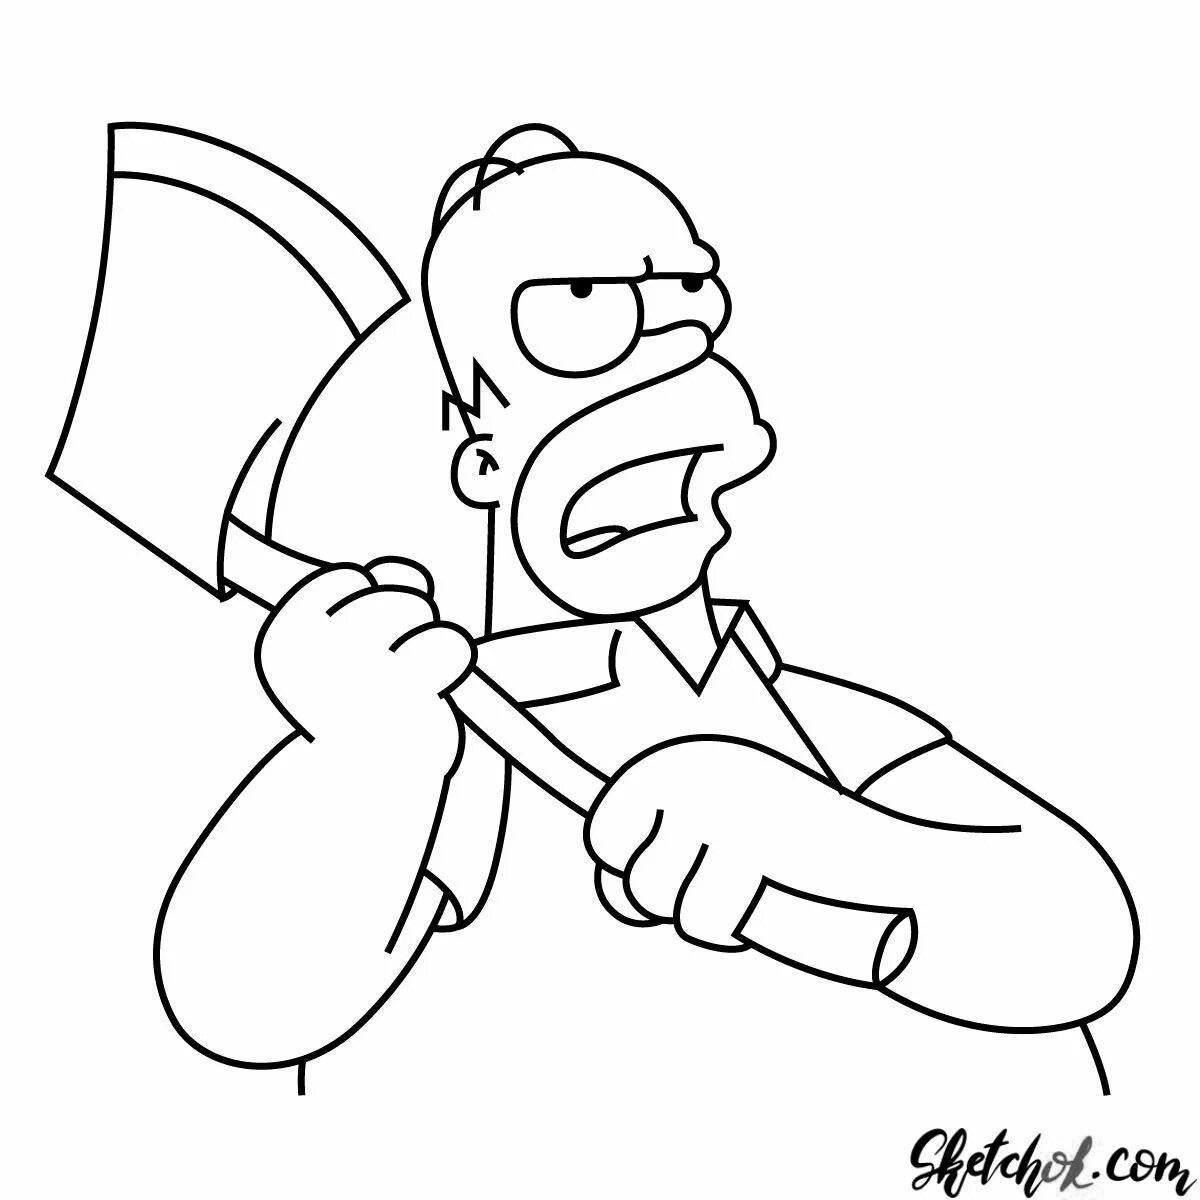 Homer Simpson coloring pages with color madness